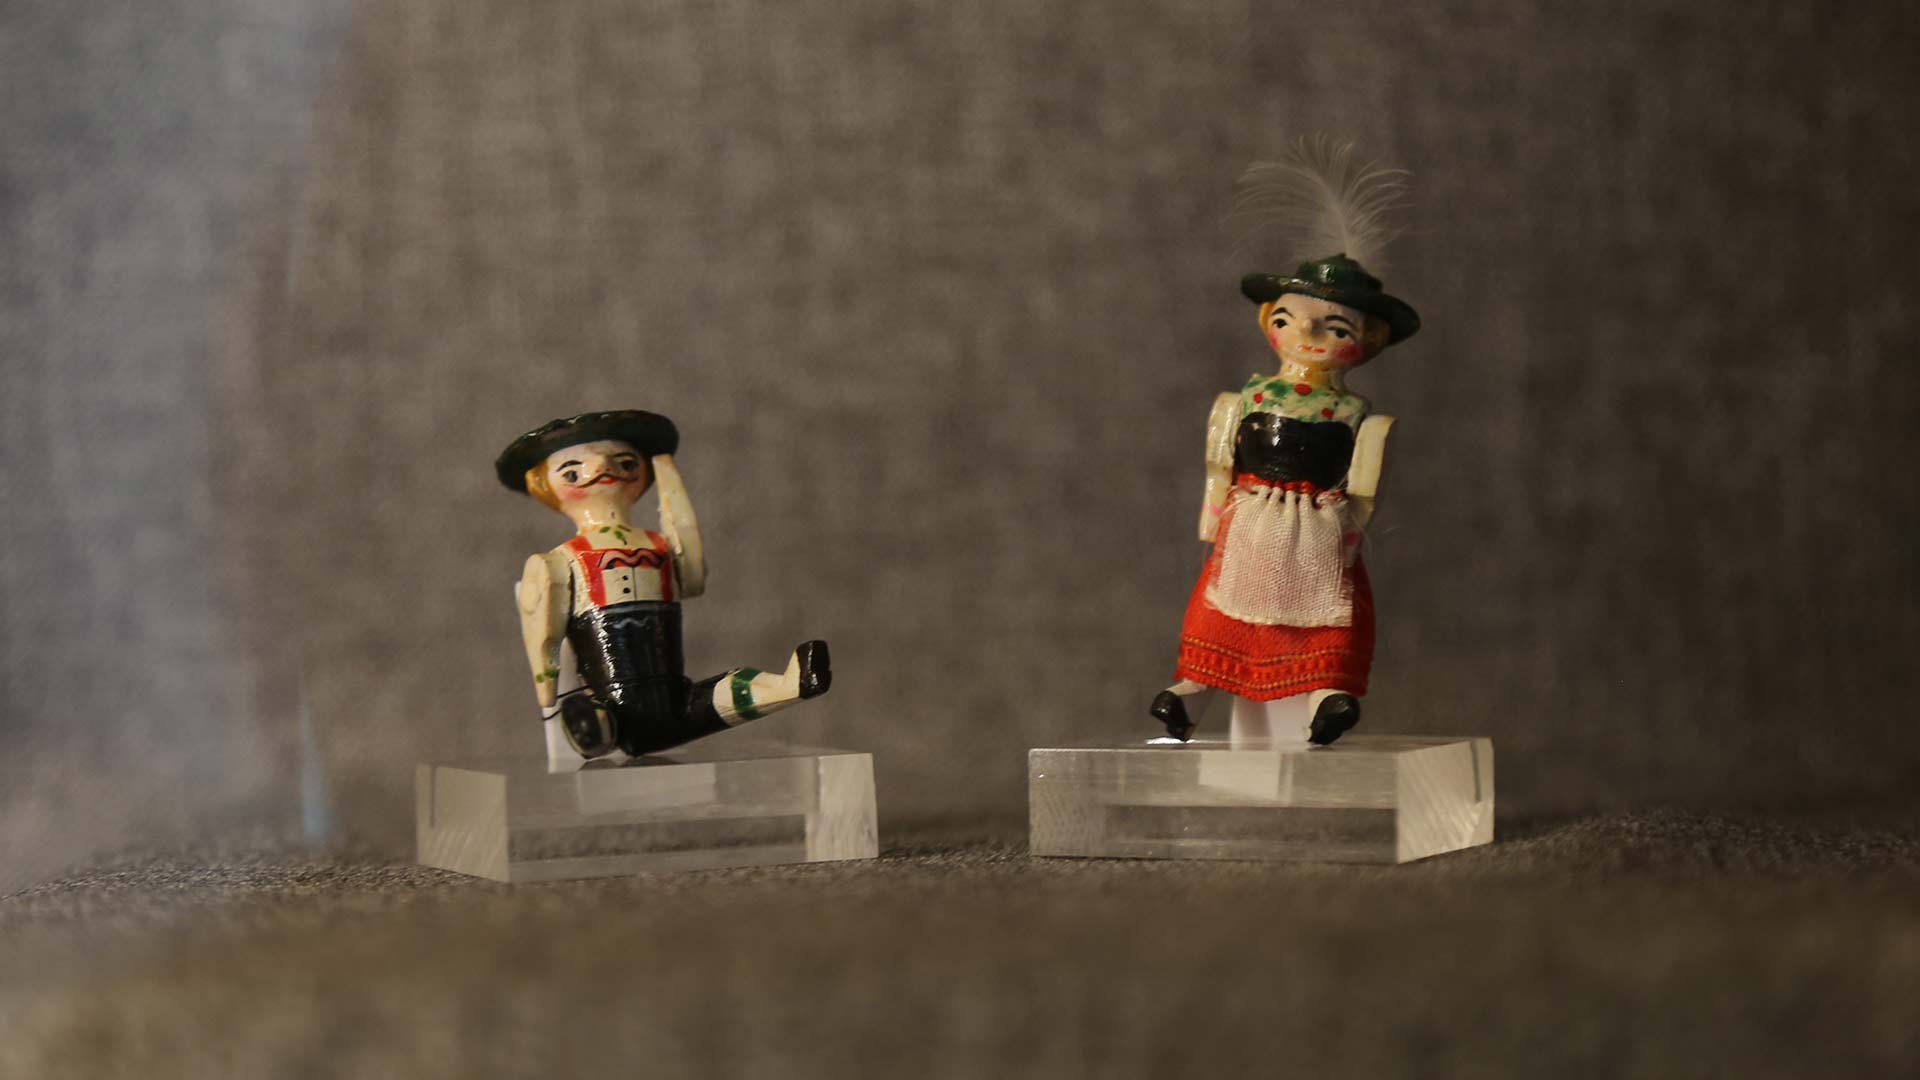 pair of wooden dolls, one male and one female